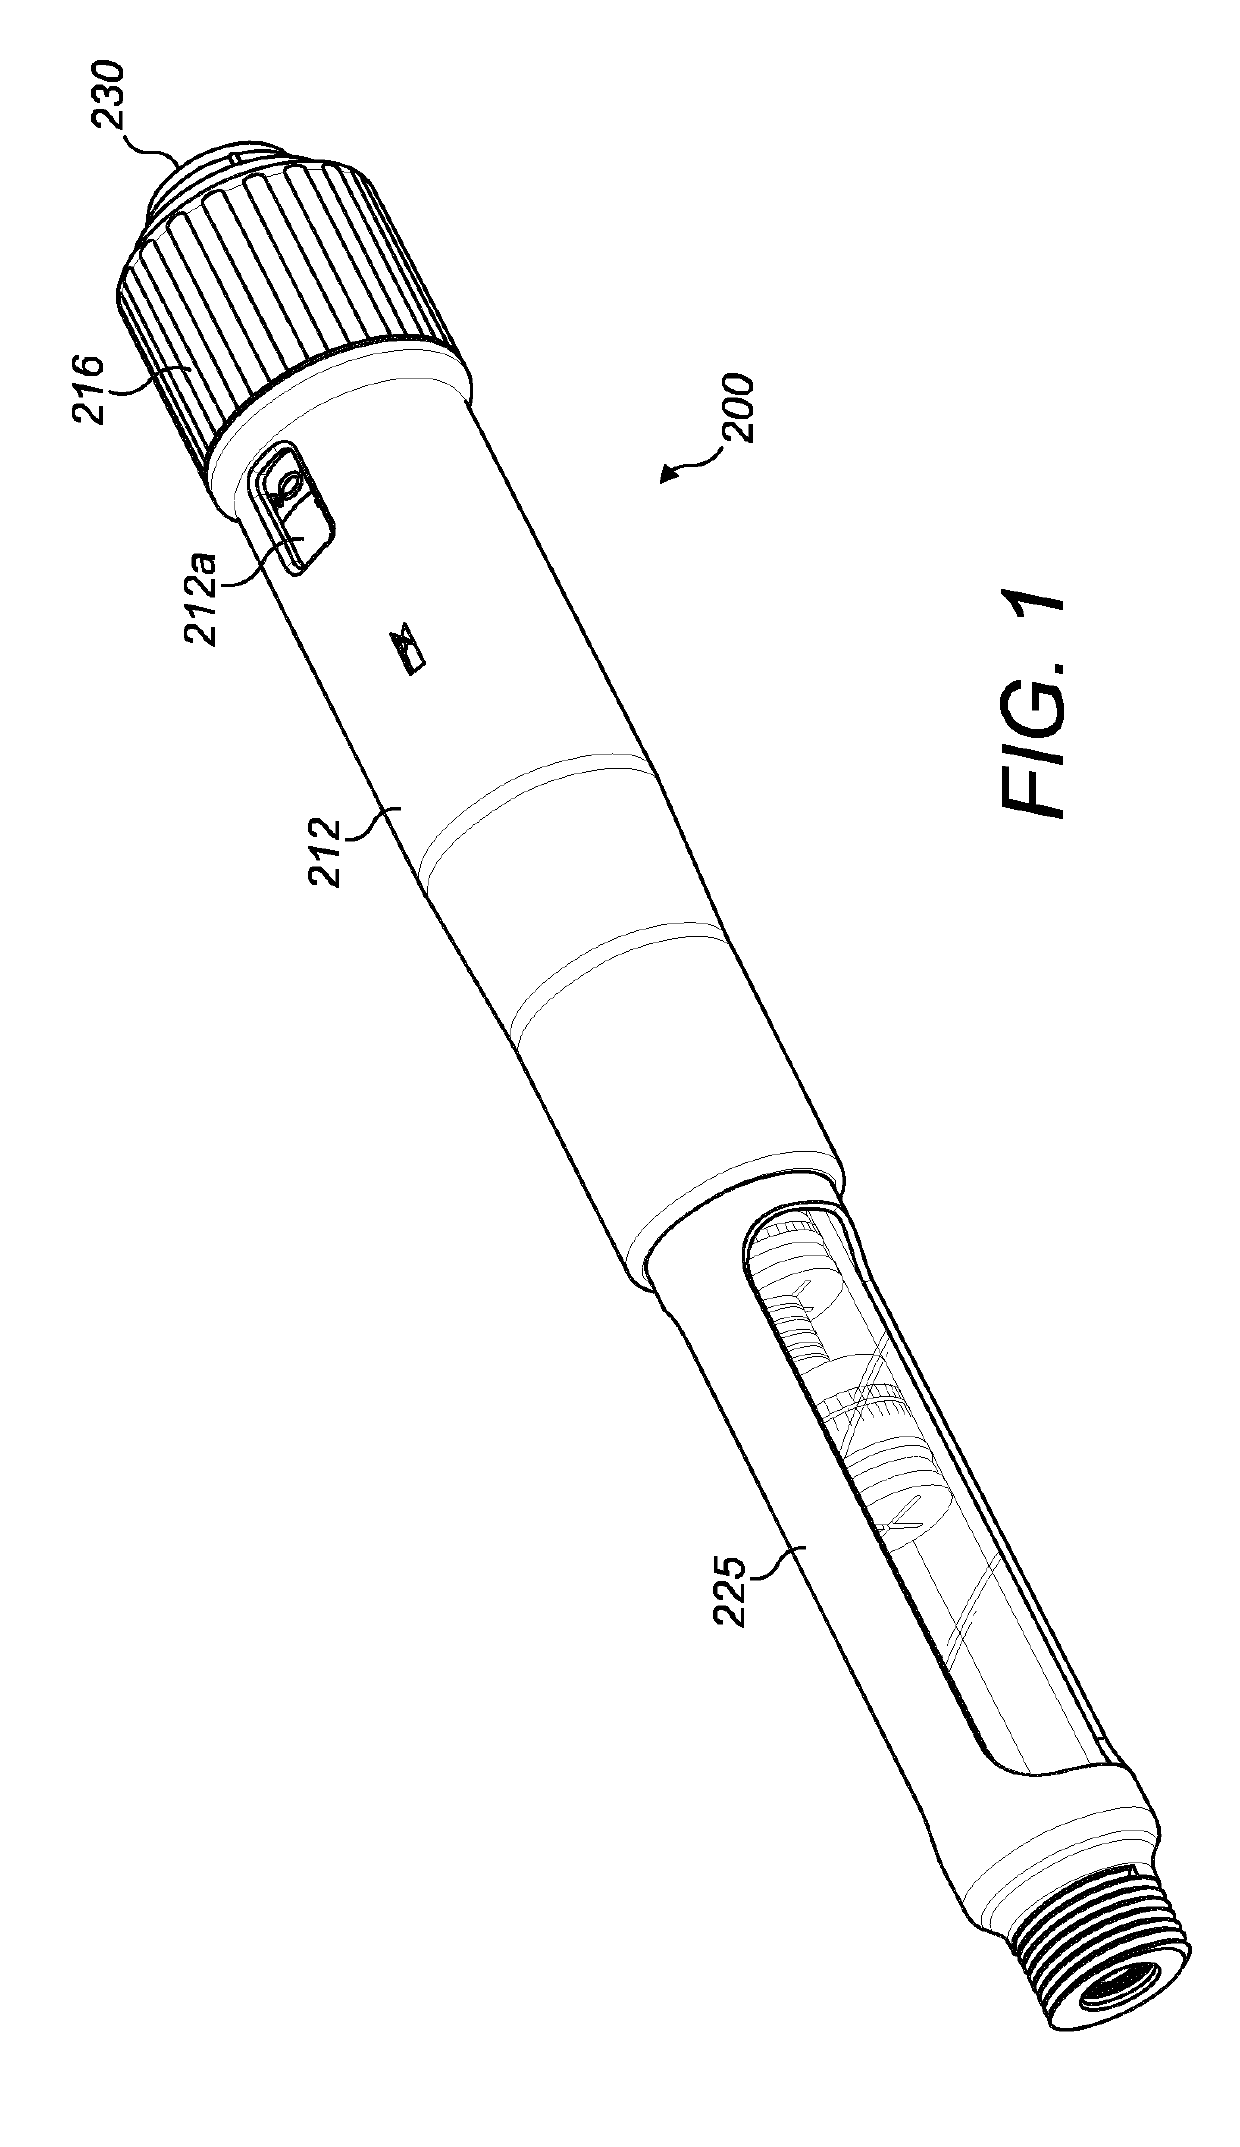 Injection device with dose indicator mechanism